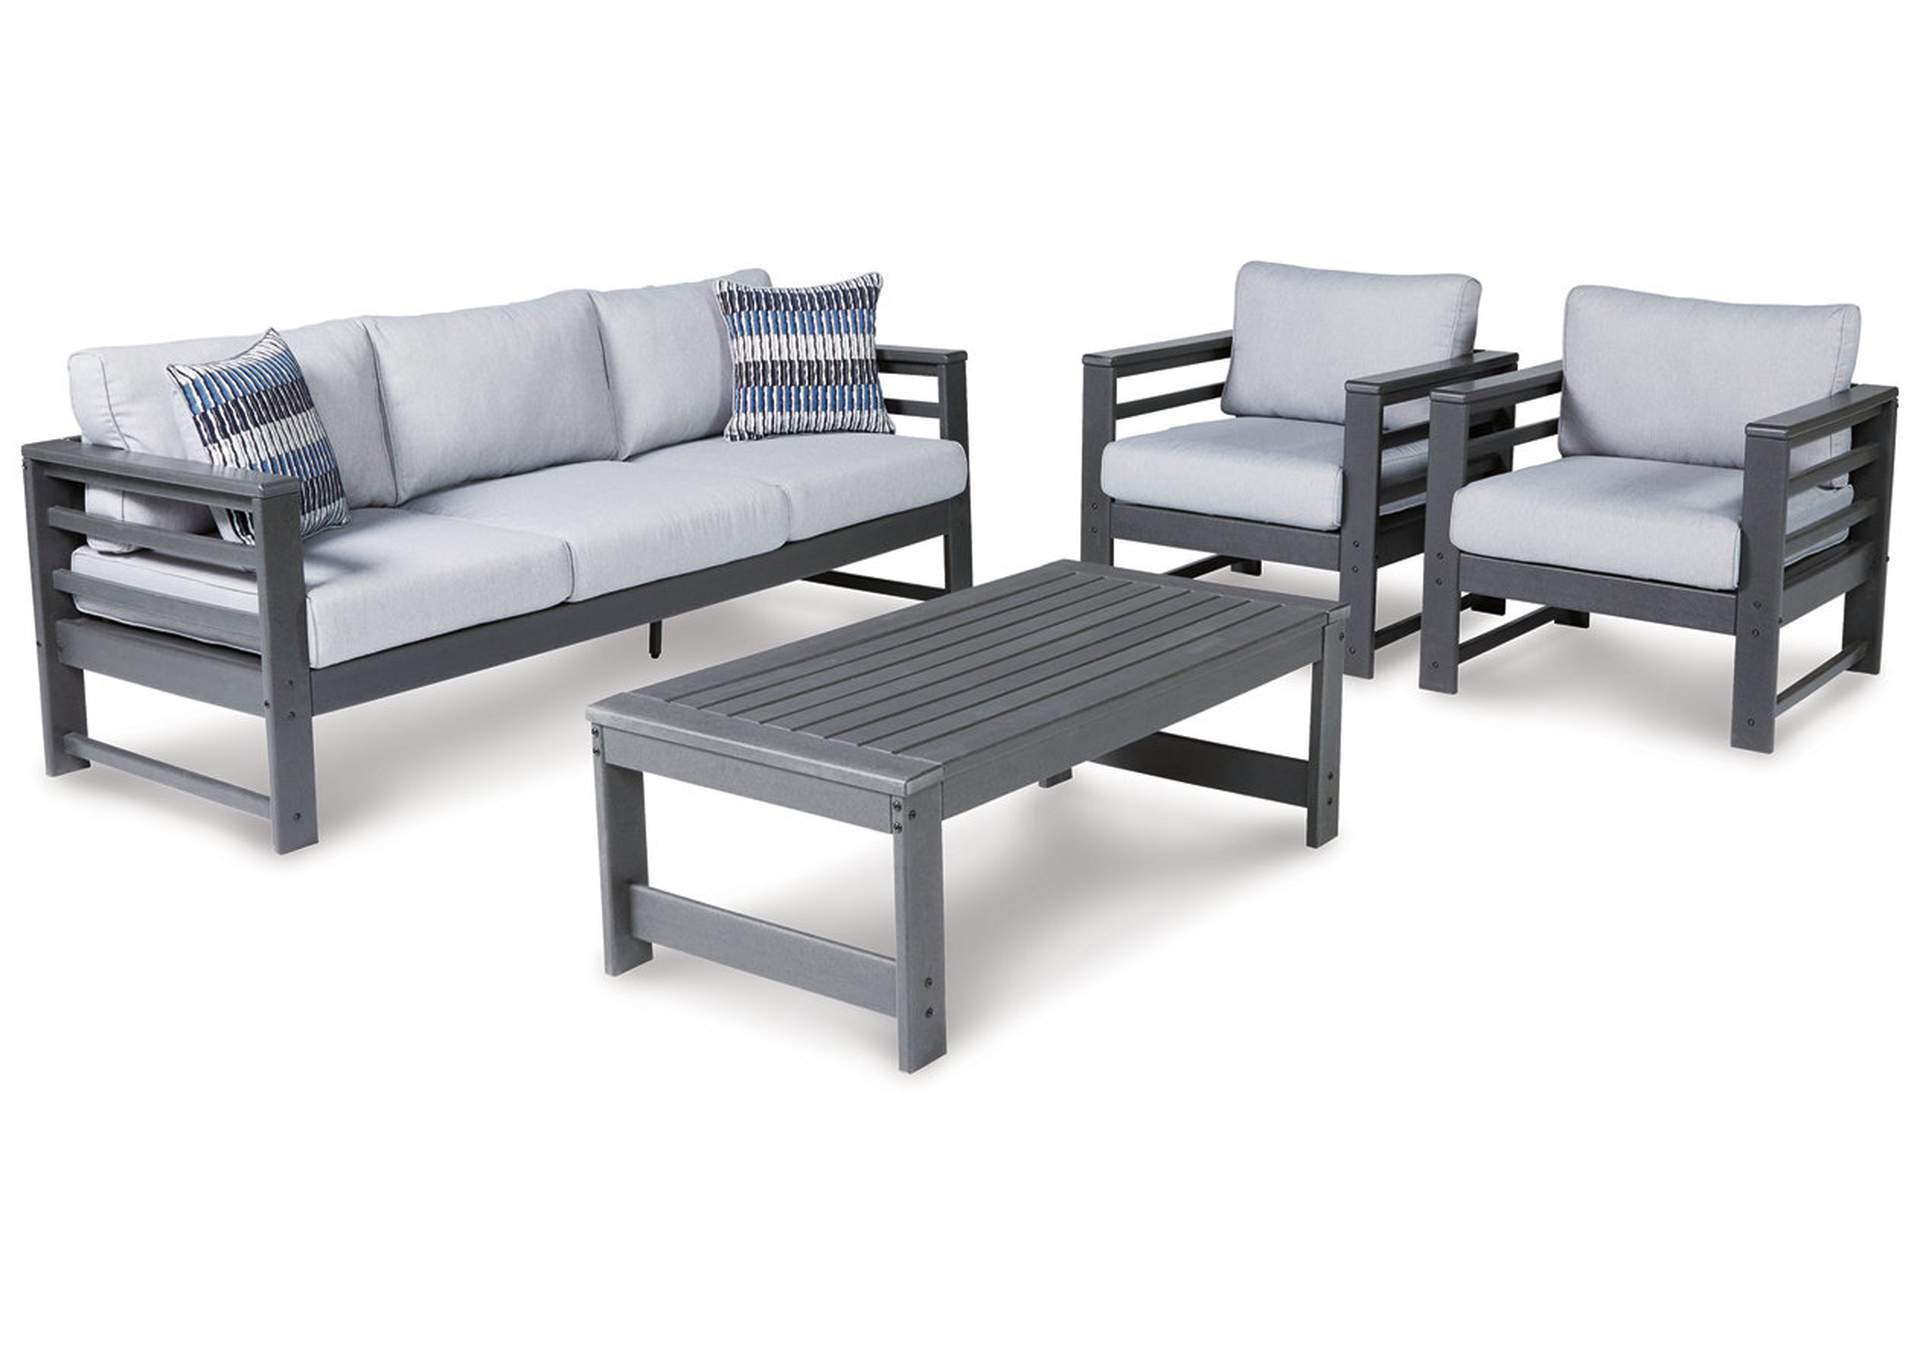 Amora Outdoor Sofa and 2 Chairs with Coffee Table